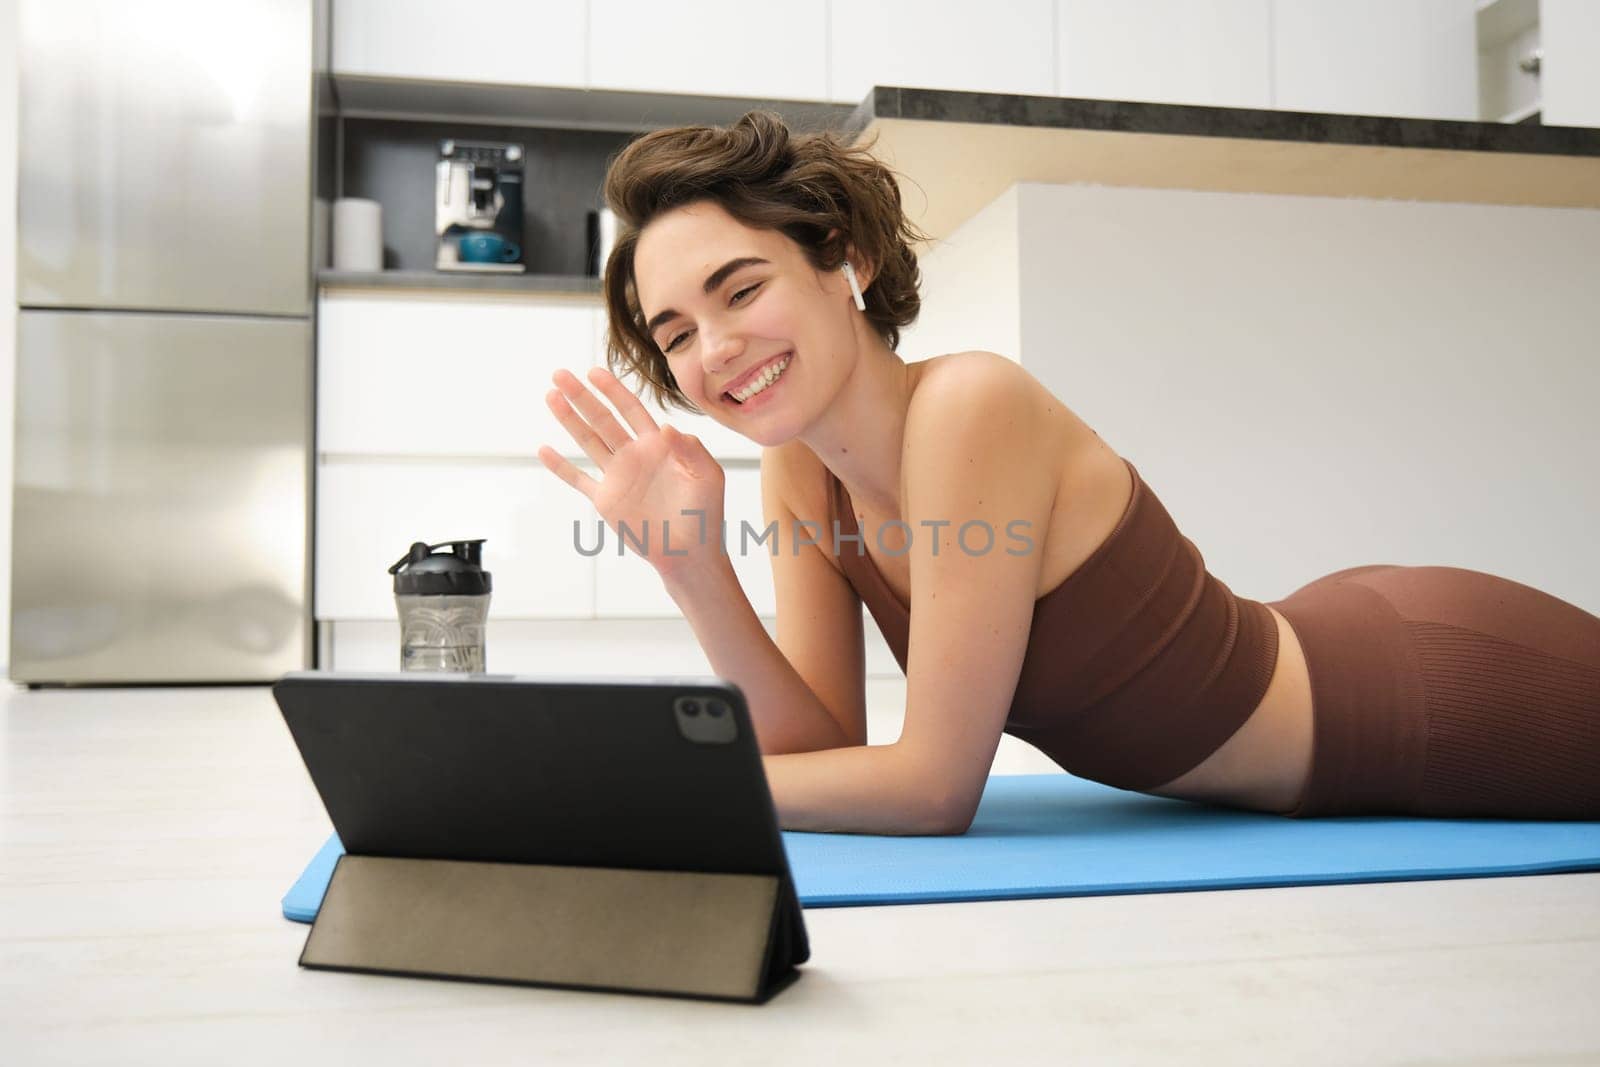 Smiling brunette woman in sportswear, waves hand, says hi at tablet, records video sports blog, fitness training session online, instructor shows workout elements, uses rubber mat at home in kitchen.